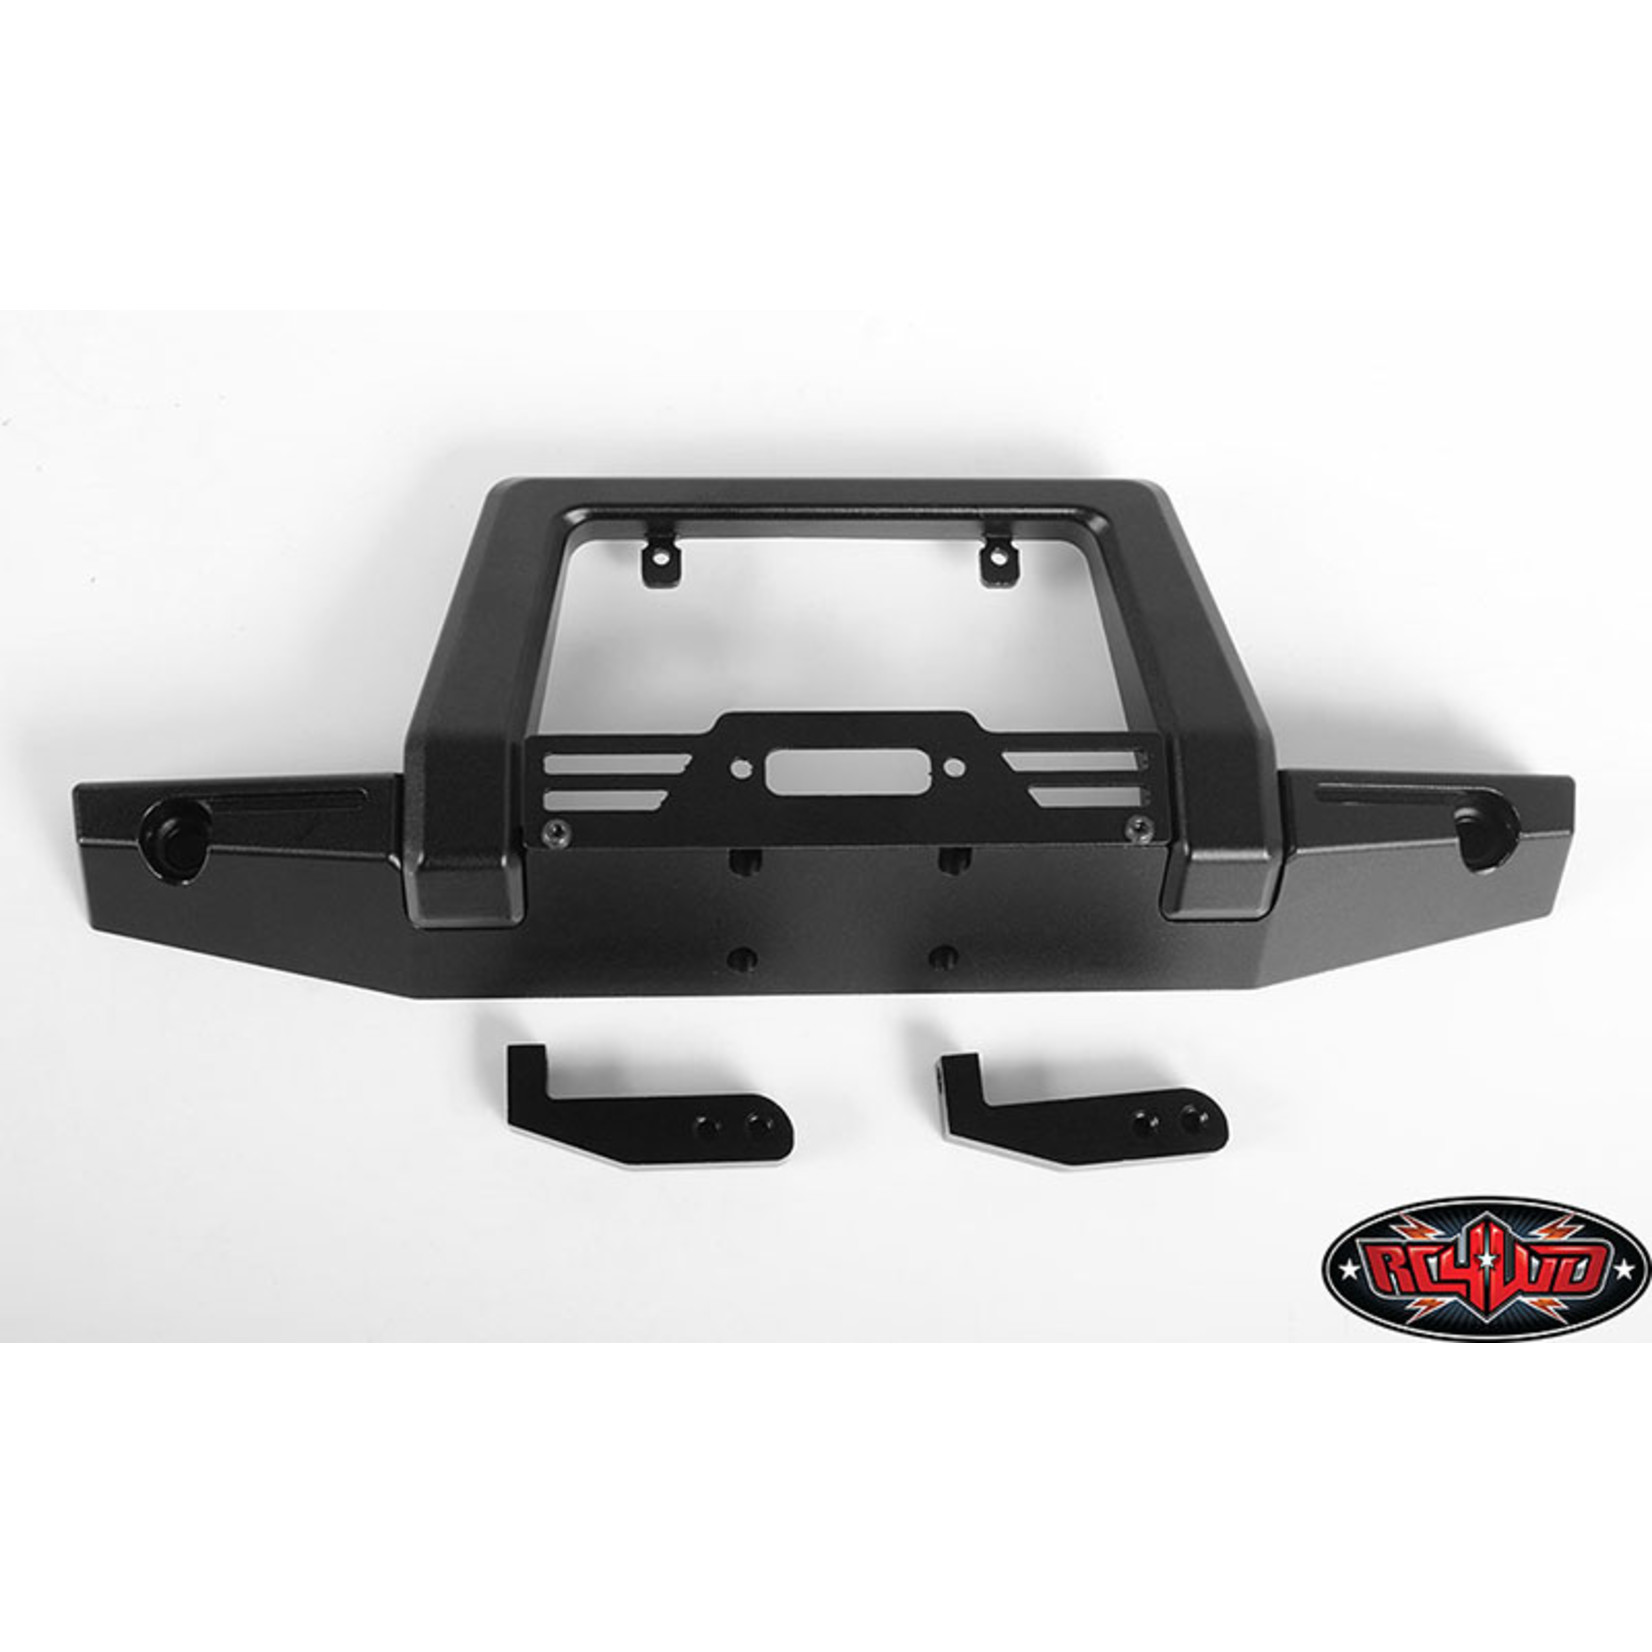 RC4WD RC4VVVC0449 RC4WD Pawn Metal Front Bumper for Traxxas TRX-4